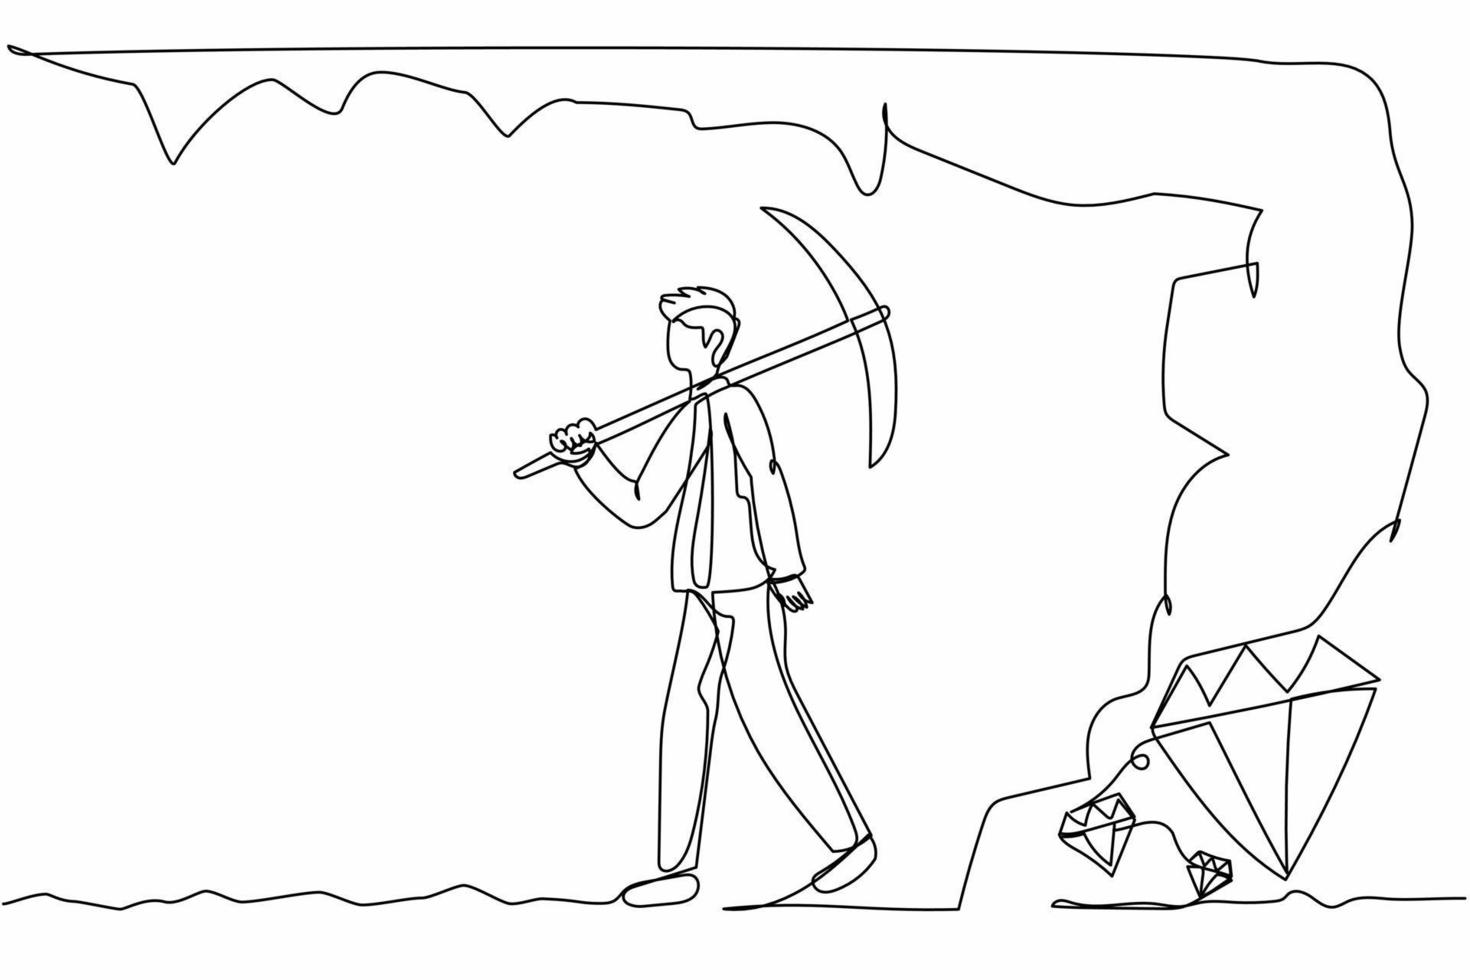 Continuous one line drawing exhausted businessman give up before reach diamonds. Worker stop digging with pickaxe, not knowing precious diamond almost revealed. Single line design vector illustration